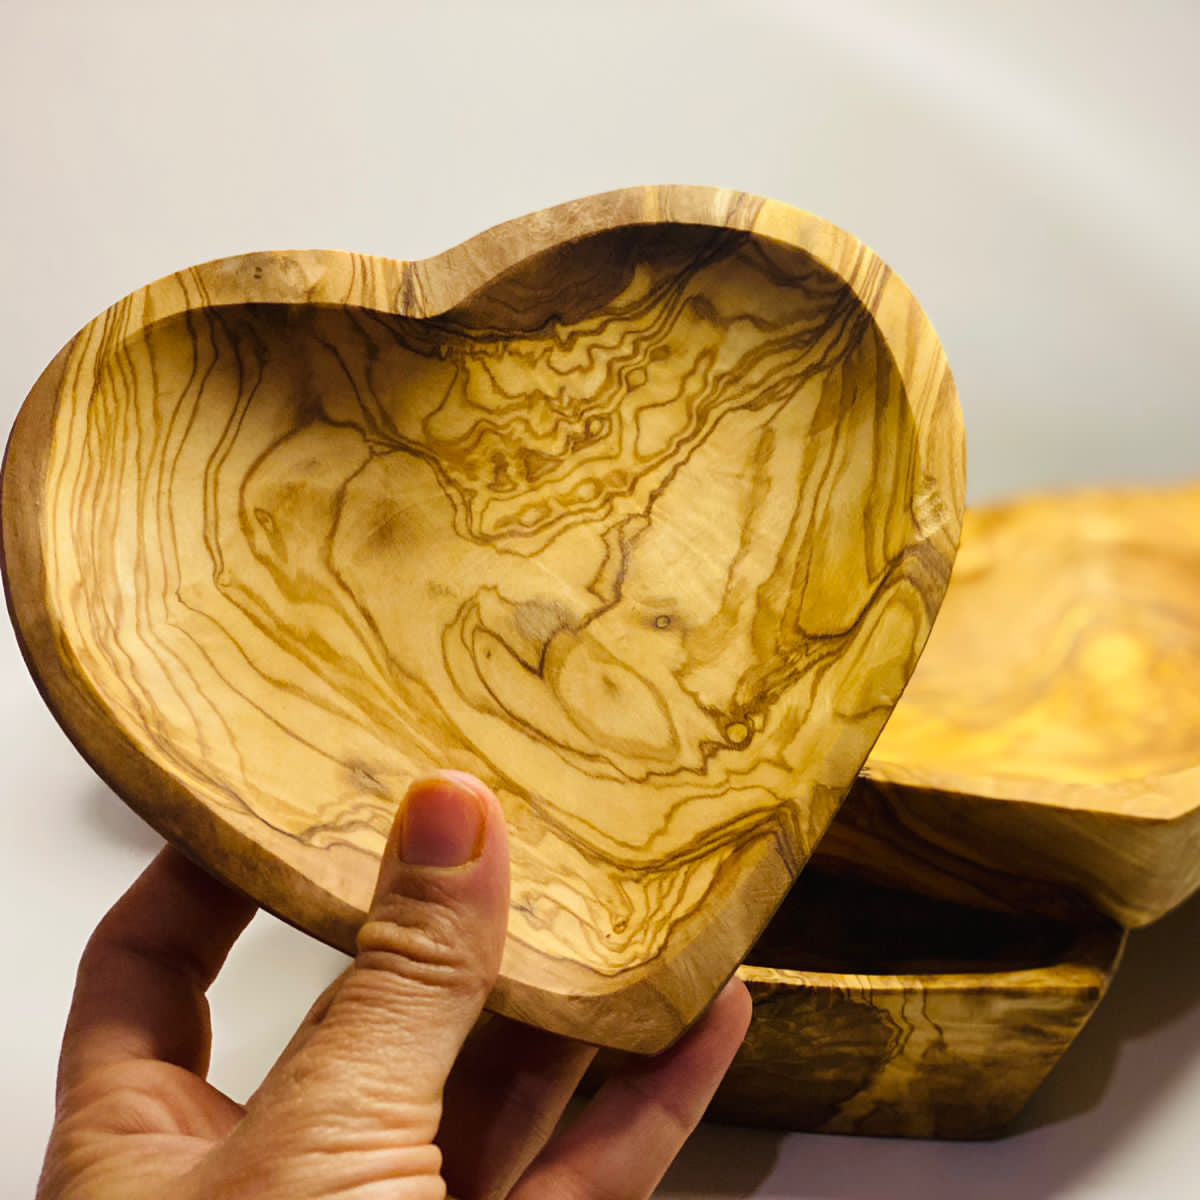 VOW | Olive Wood Heart Rolling Tray/Smoker's Gift_1